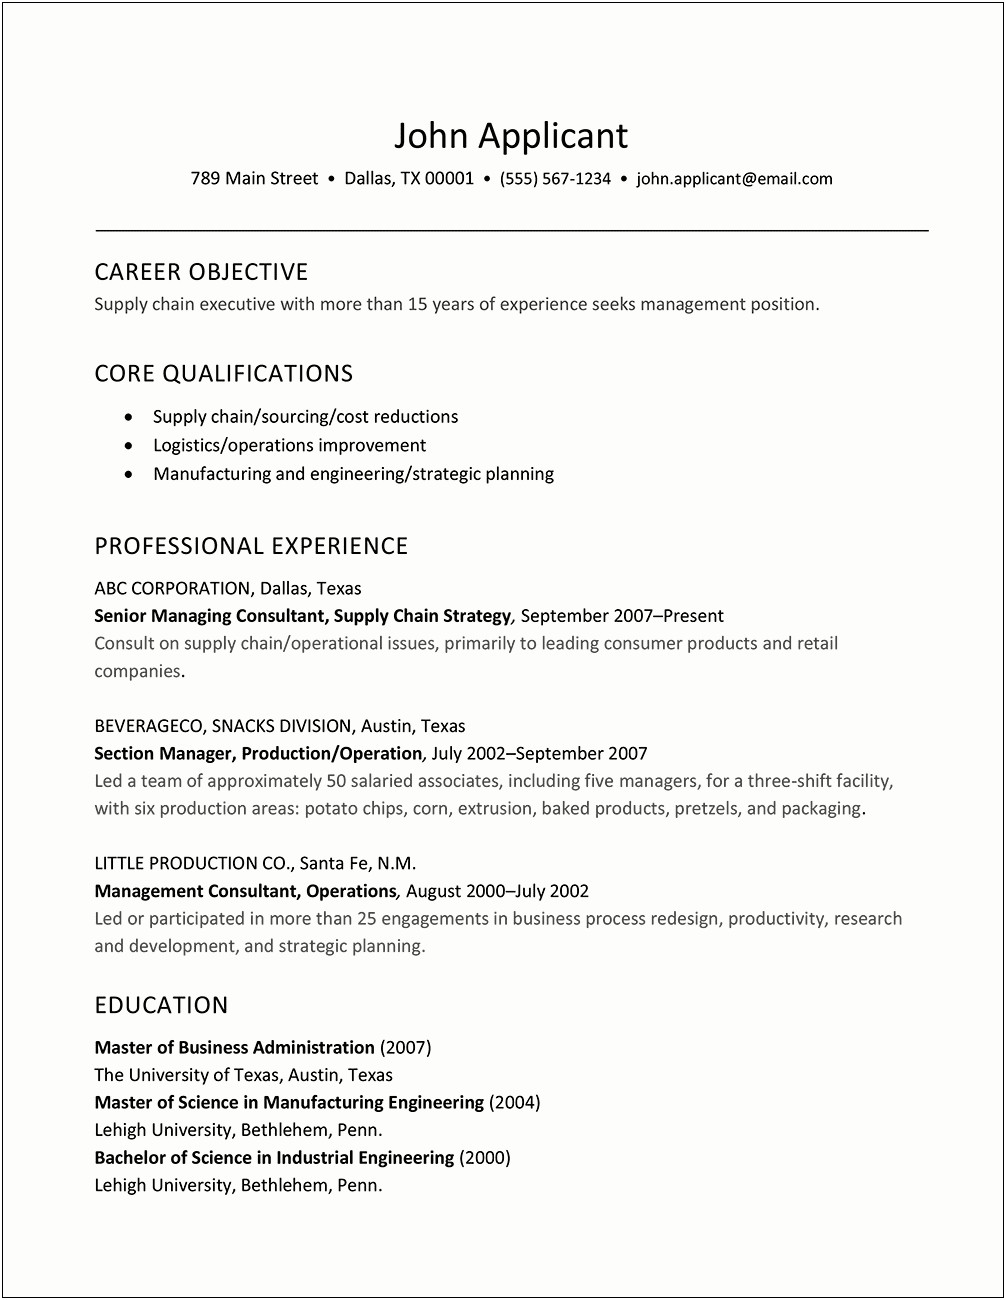 Best Resume Format For Logistics Executive